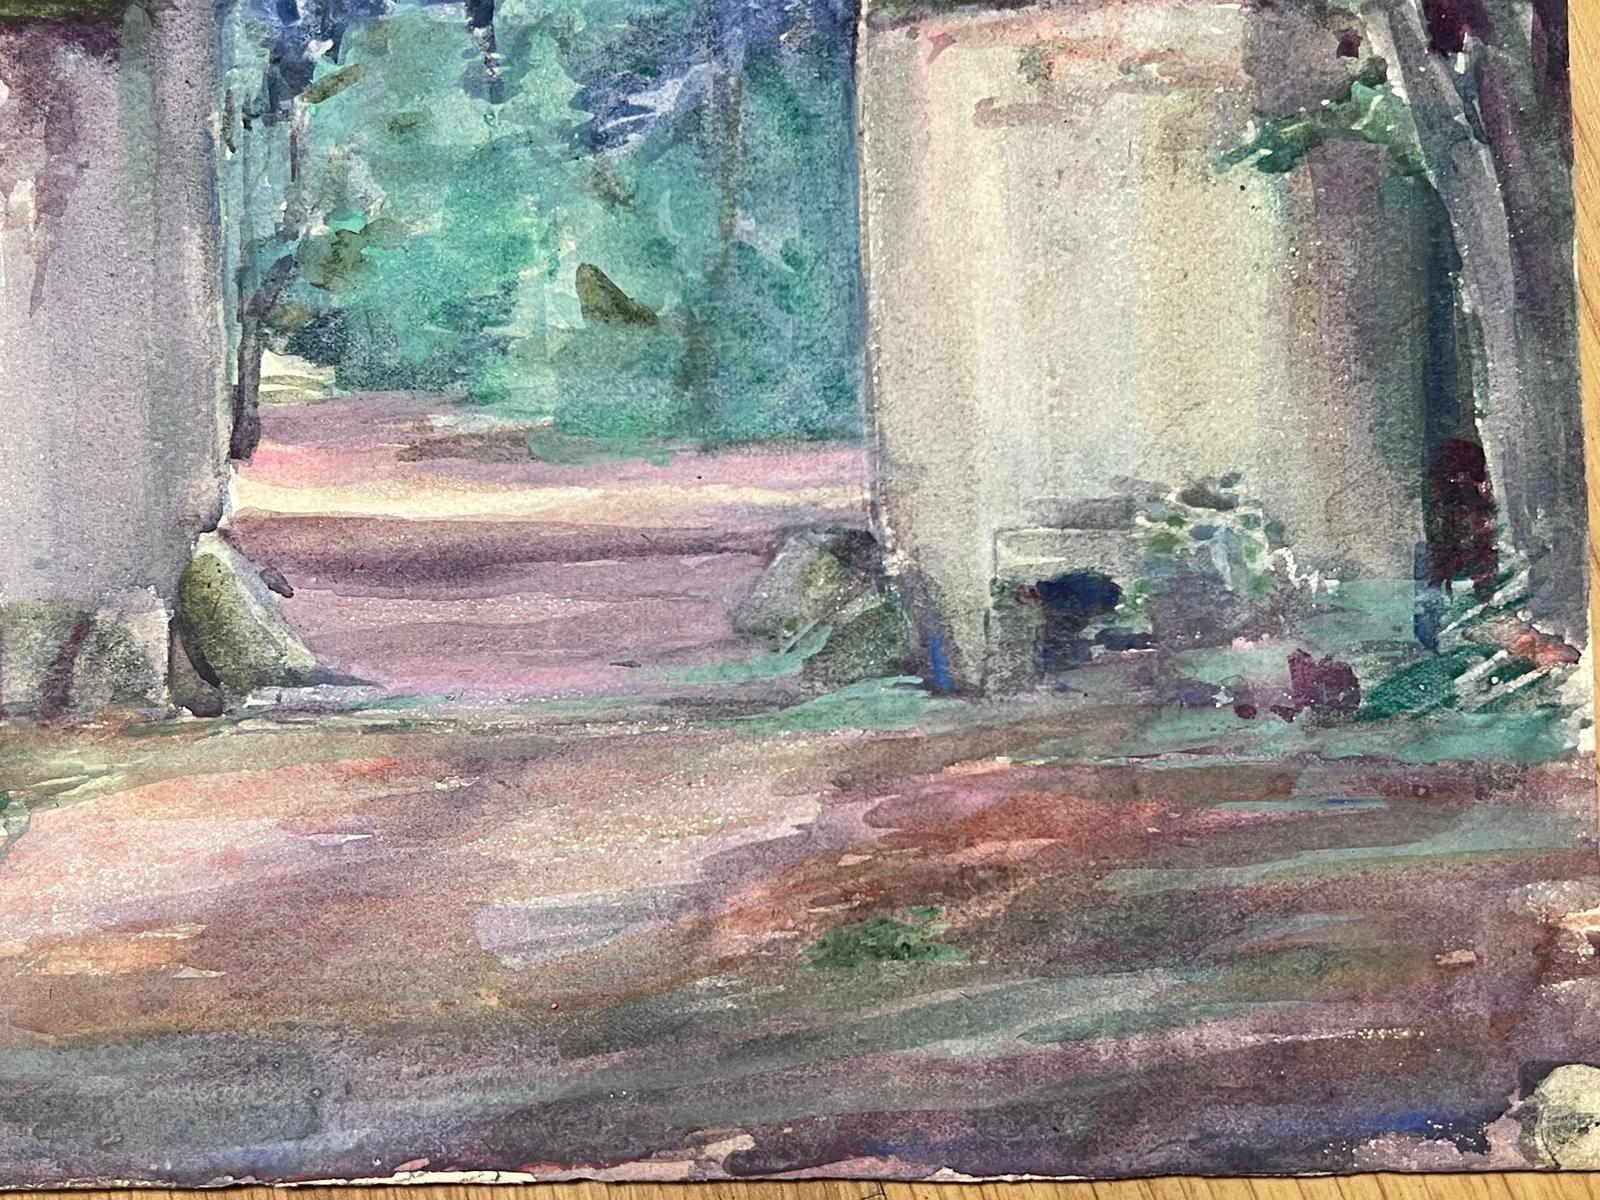 Vintage French Painting
by Louise Alix (French, 1888-1980) *see notes below
provenance stamp to the back
watercolour painting on artist paper, unframed
measures: 9.5 inches high by 12.5 inches wide
condition: overall very good and sound, a few